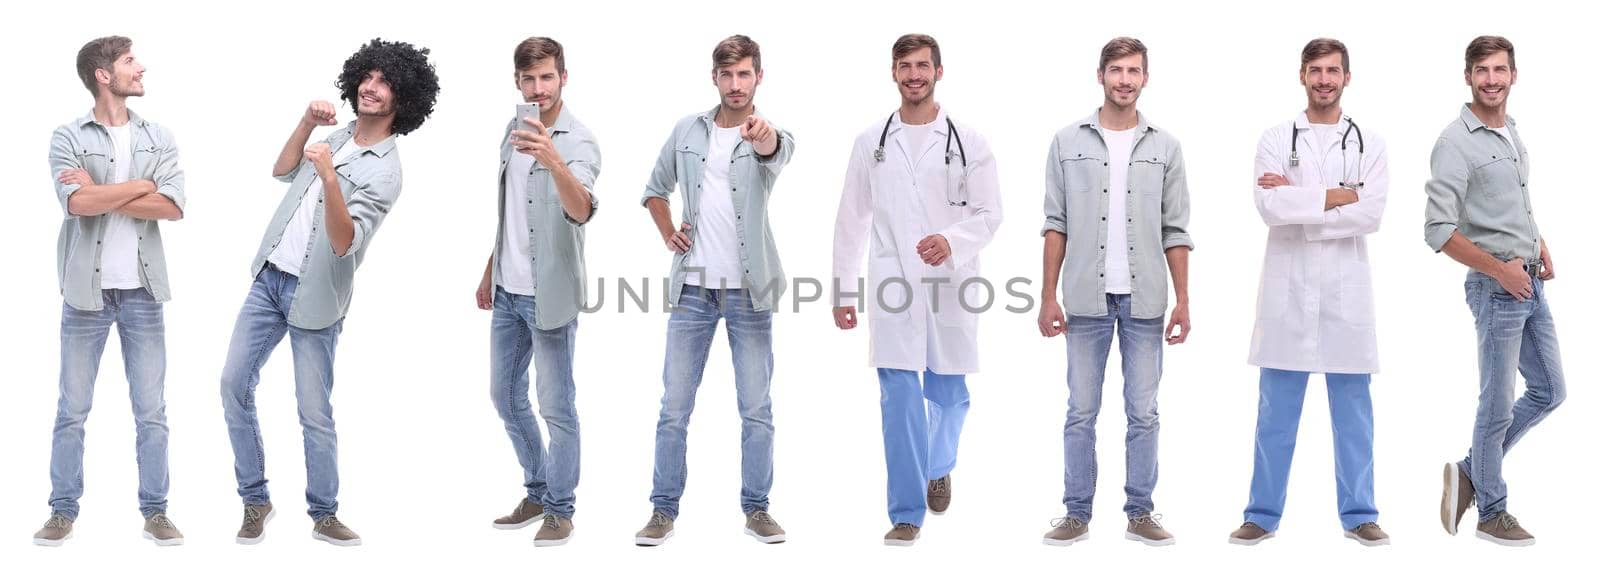 collage doctor and young man isolated on white background